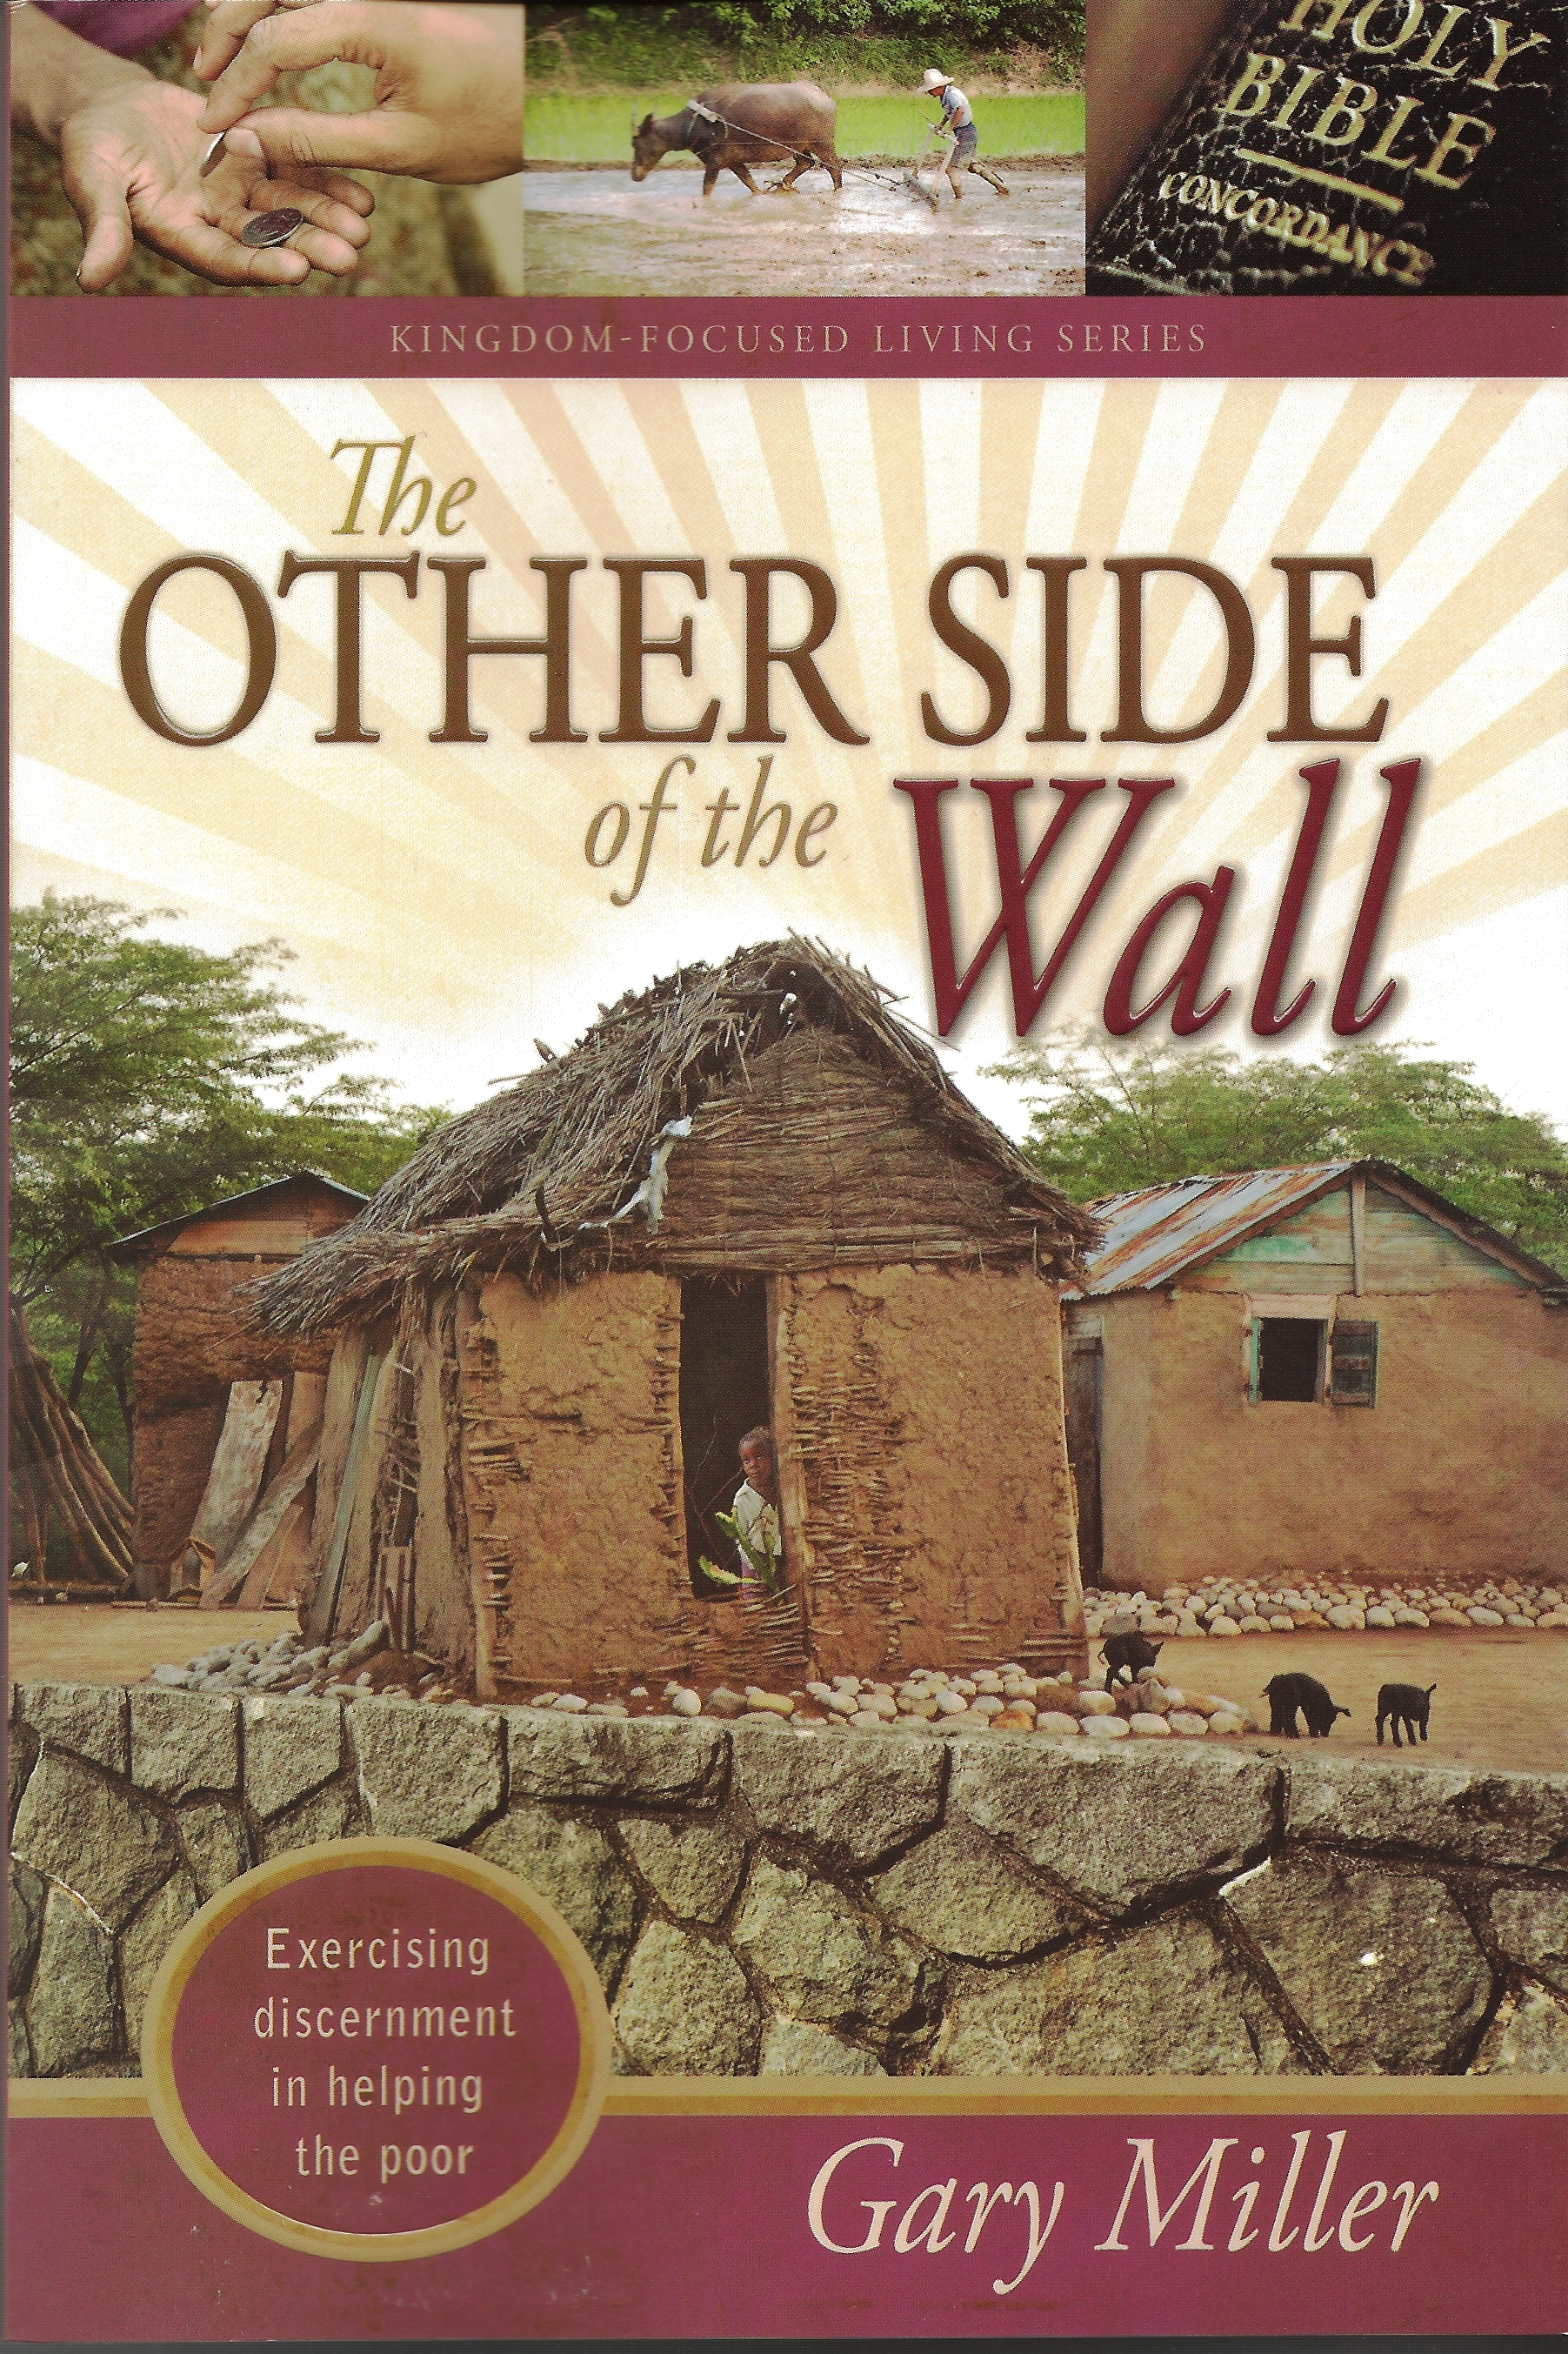 THE OTHER SIDE OF THE WALL Gary Miller